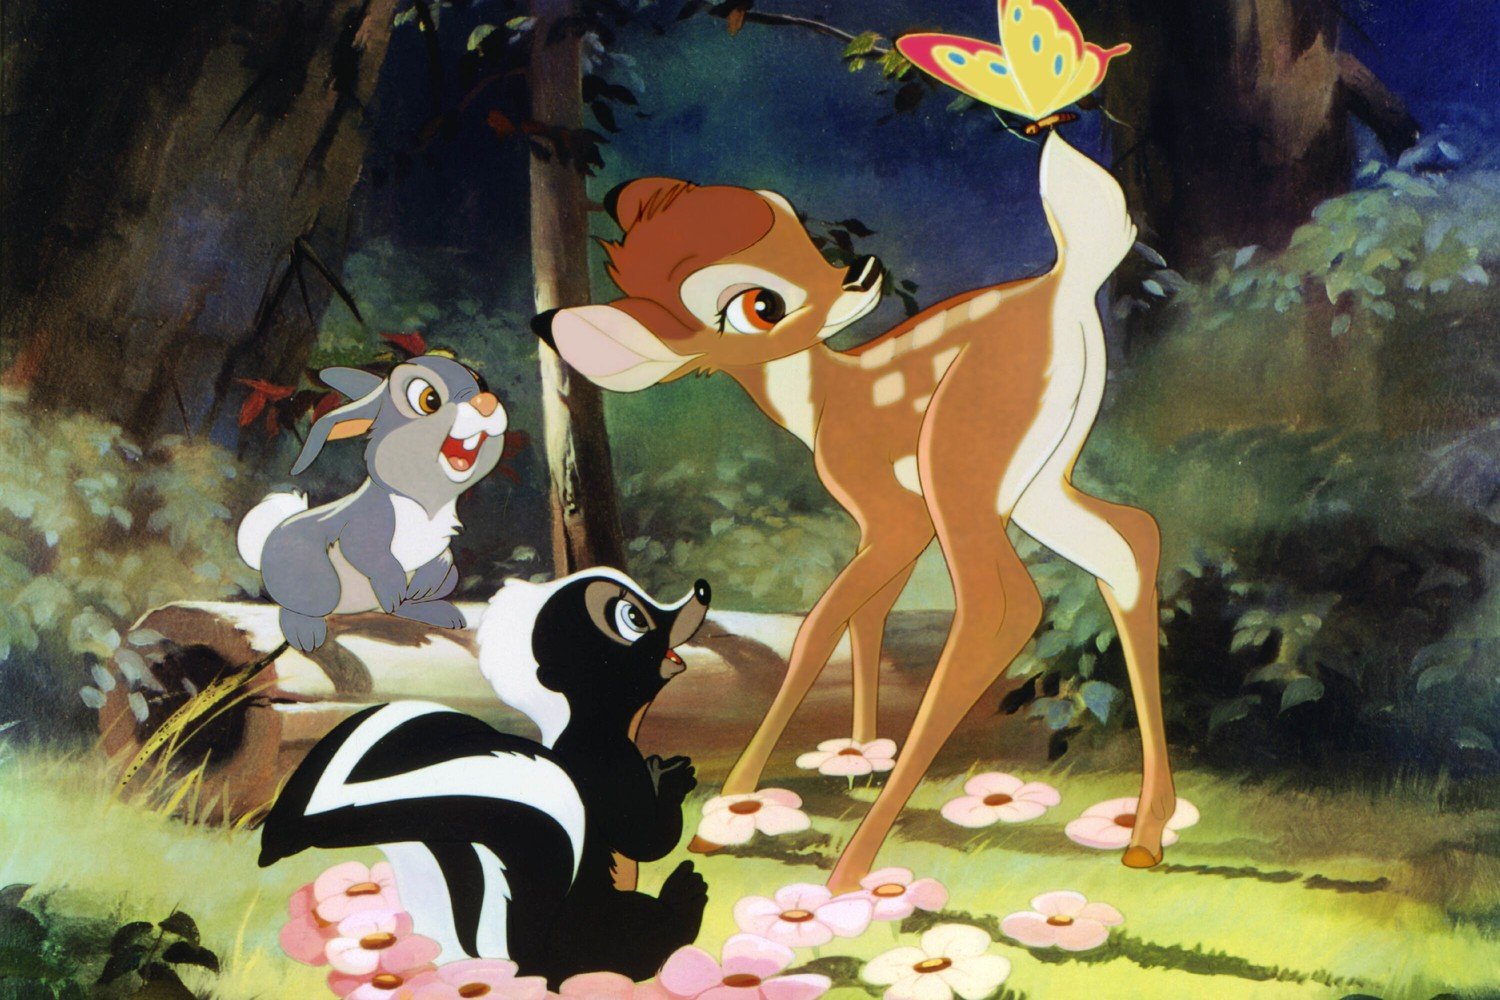 Tyrus Wong was the lead production illustrator on the 1942 Disney film Bambi.